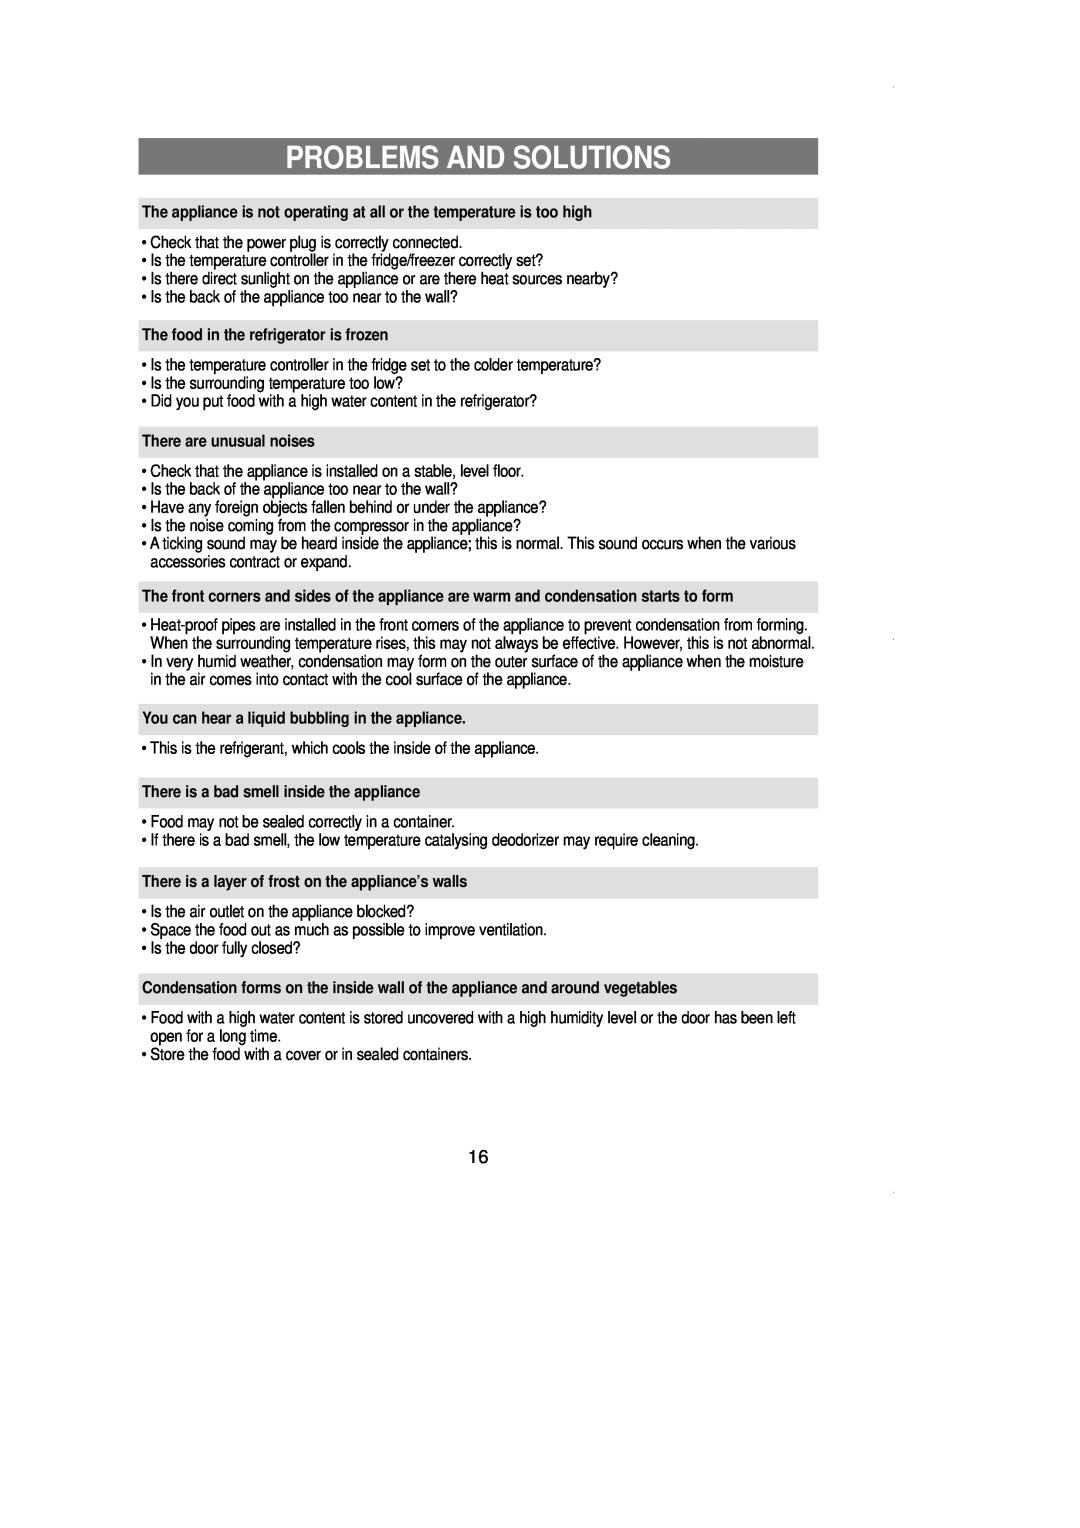 Samsung SR519DP owner manual Problems And Solutions, The food in the refrigerator is frozen, There are unusual noises 